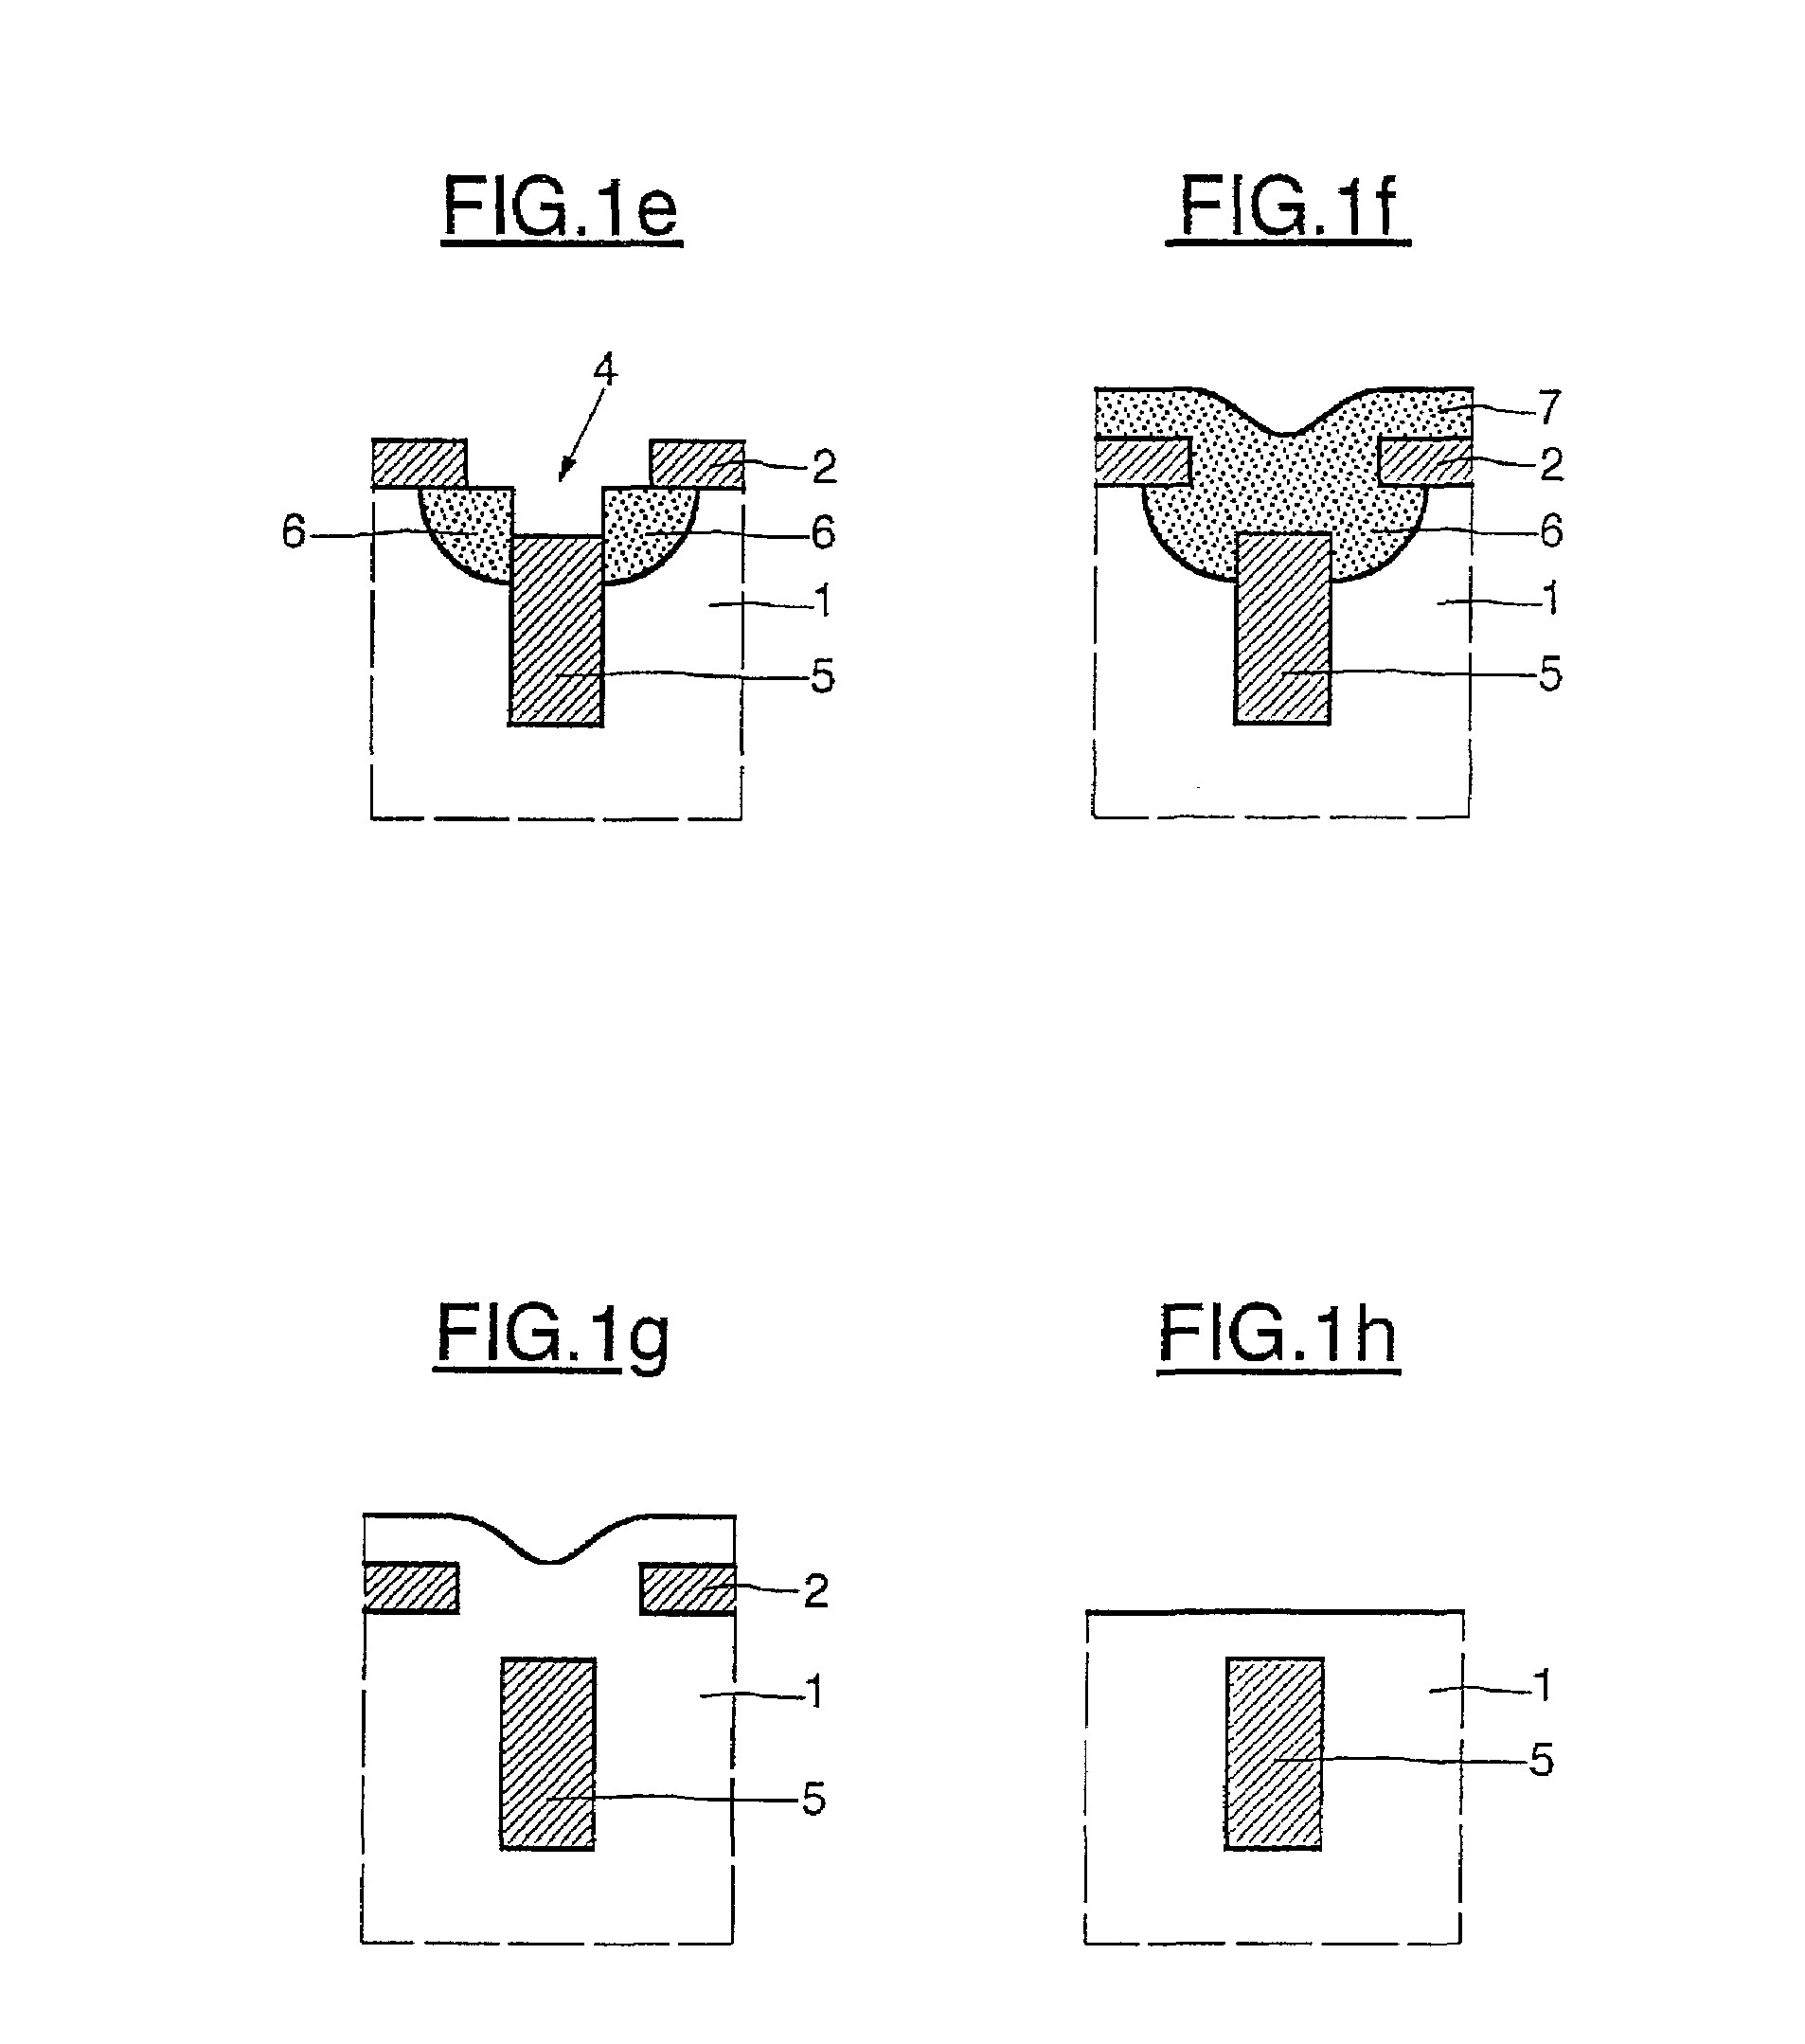 Process for fabricating a single-crystal substrate and integrated circuit comprising such a substrate